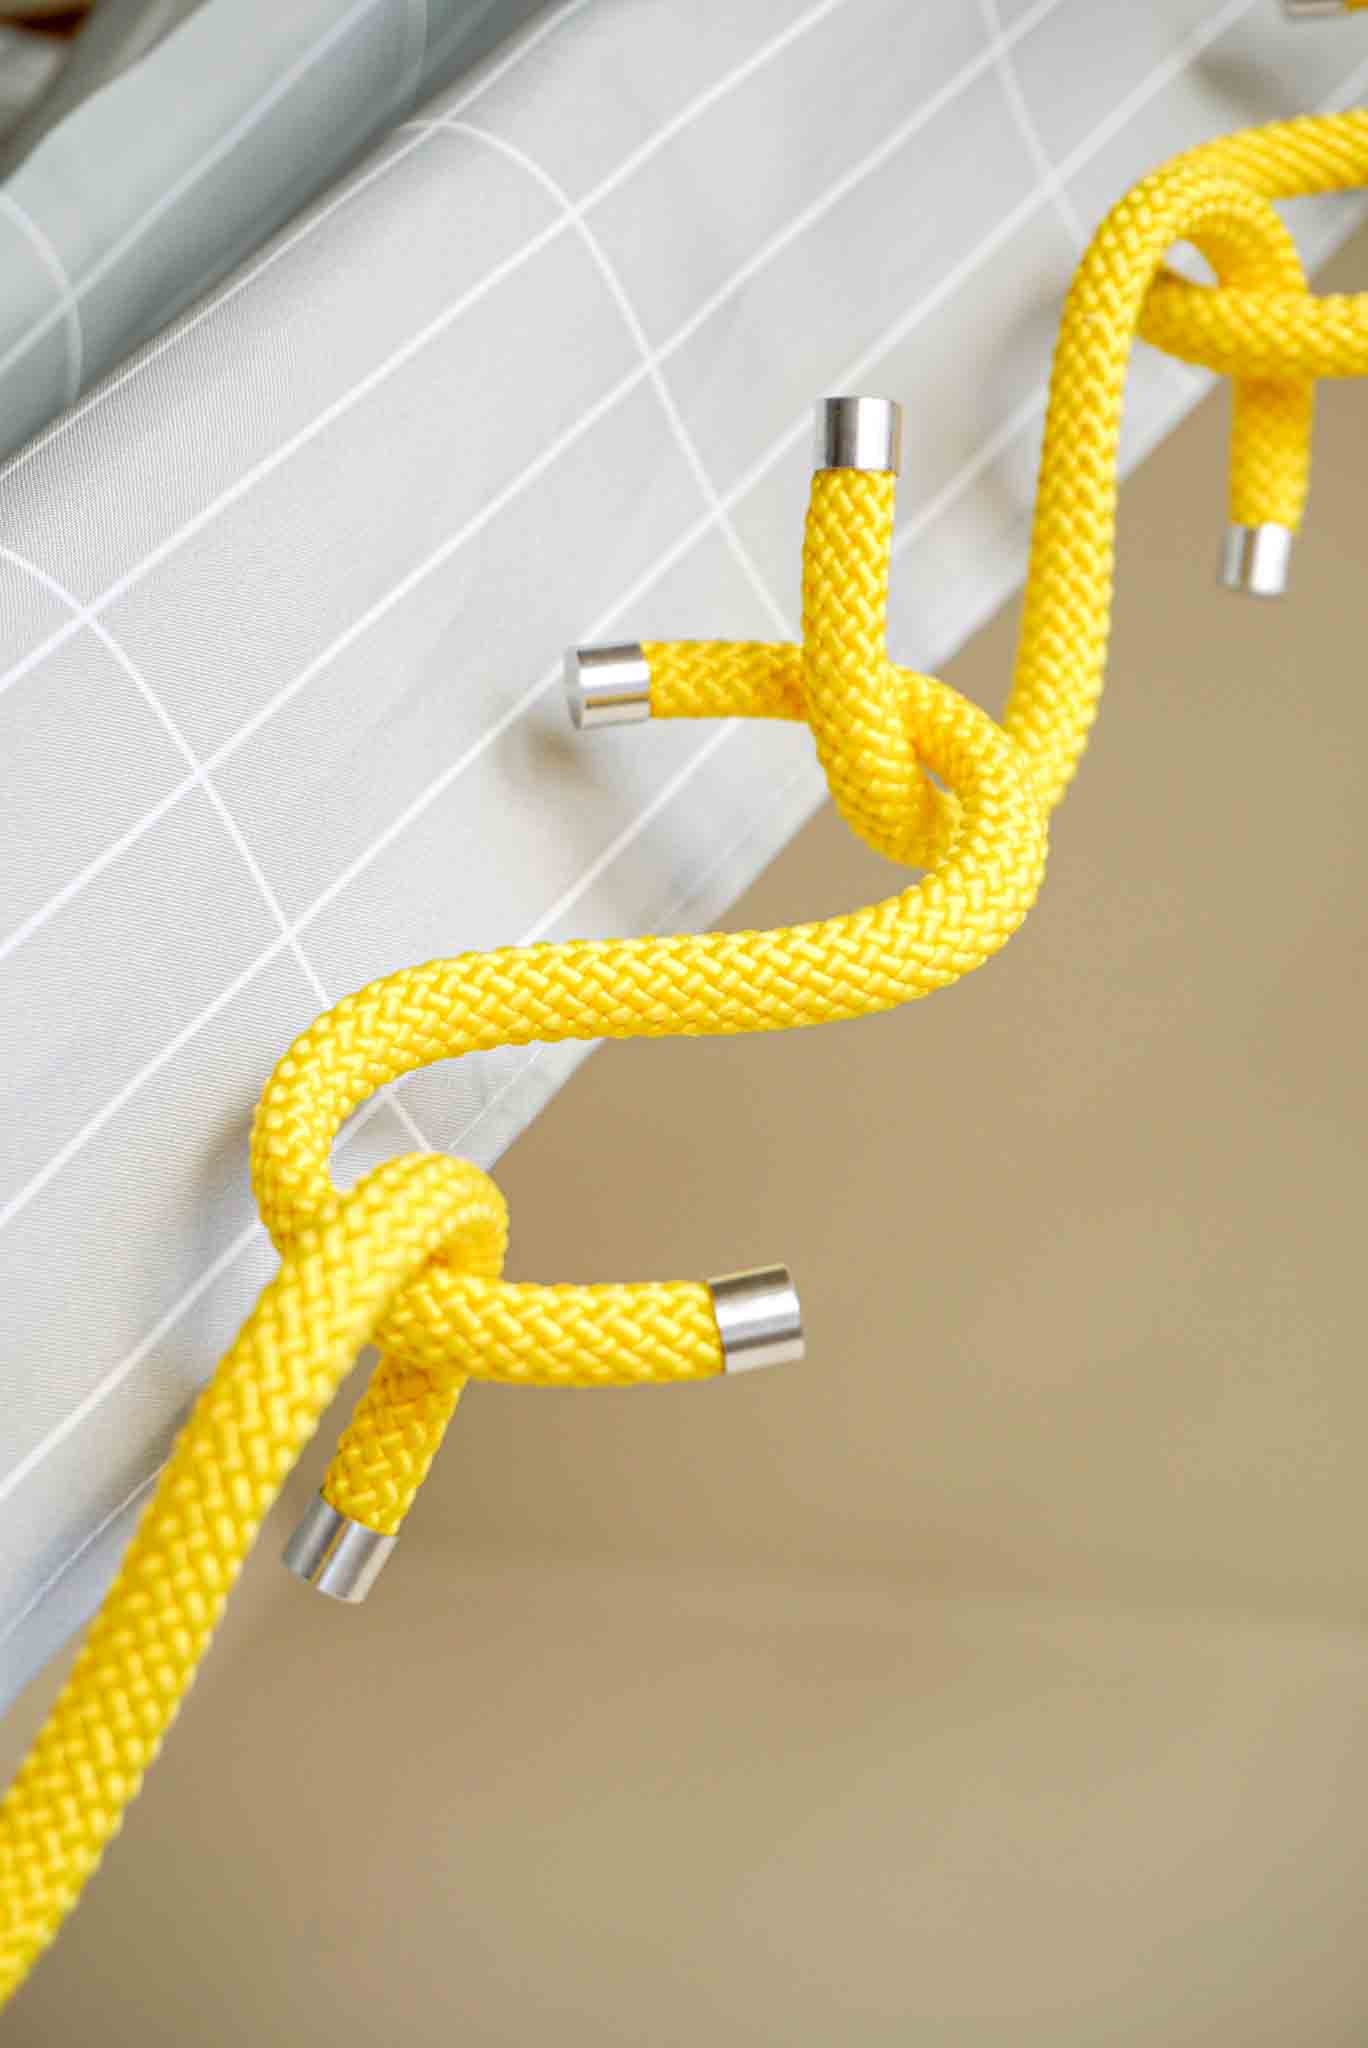 Multipurpose and Resistant Clothes Hooks